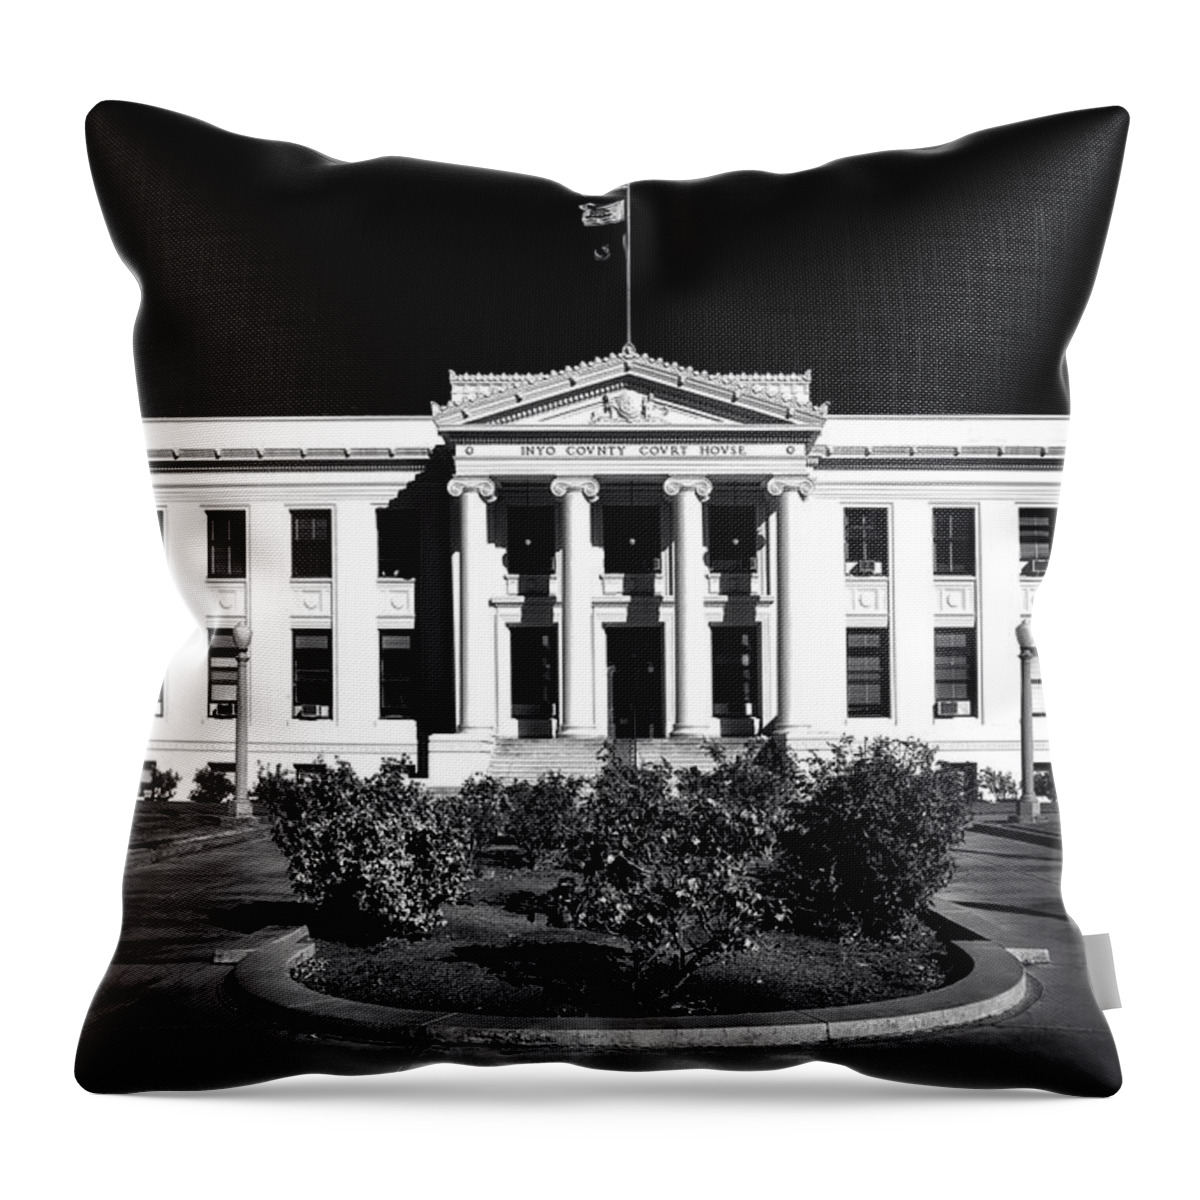 Inyo County Throw Pillow featuring the photograph Inyo County Courthouse - Independence California by Mountain Dreams